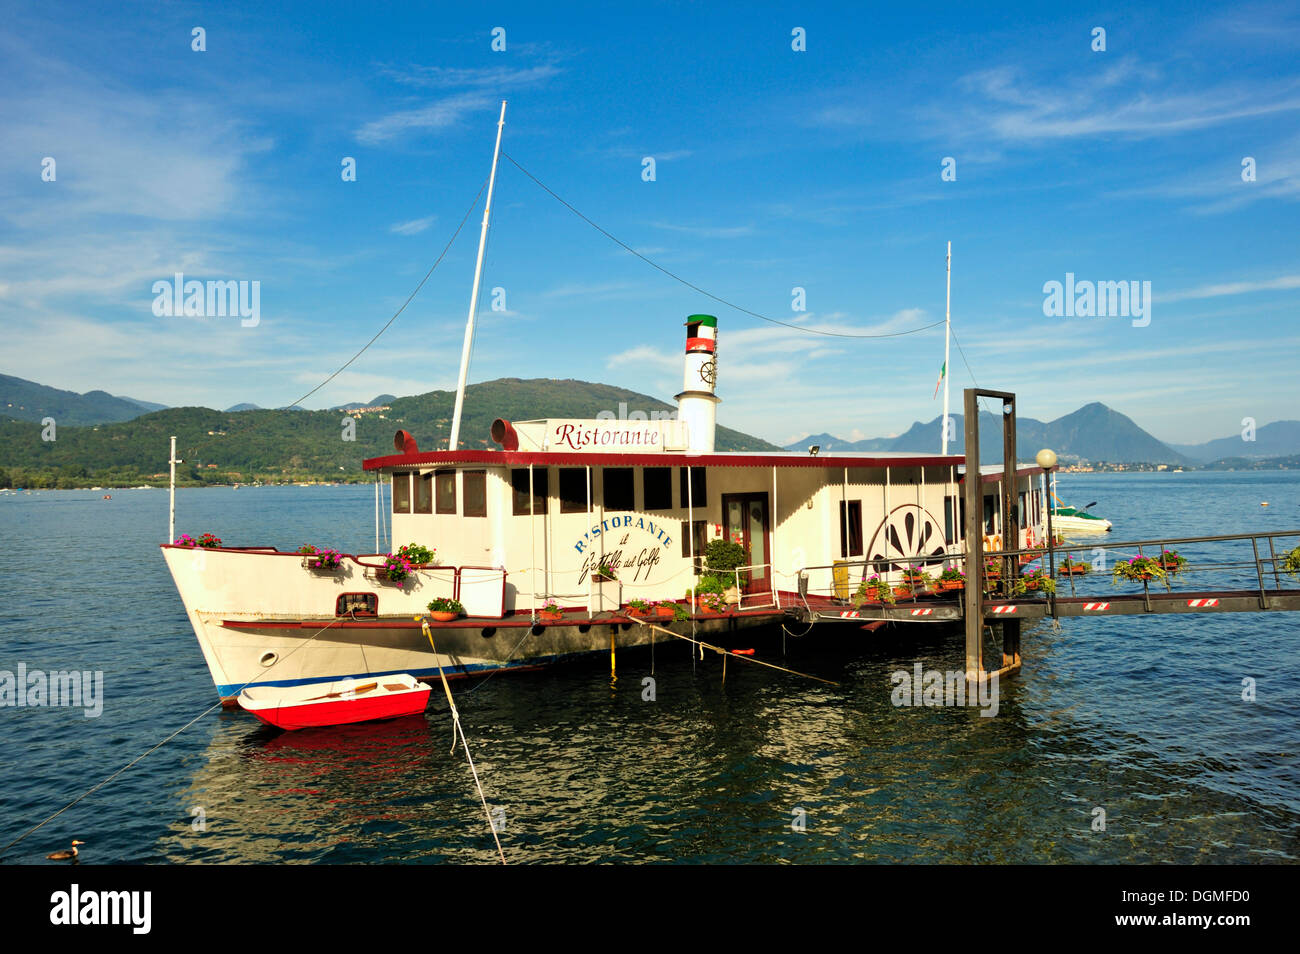 Paddle steamer as a ship restaurant, Feriolo, Lake Maggiore, Piedmont, Italy, Europe Stock Photo